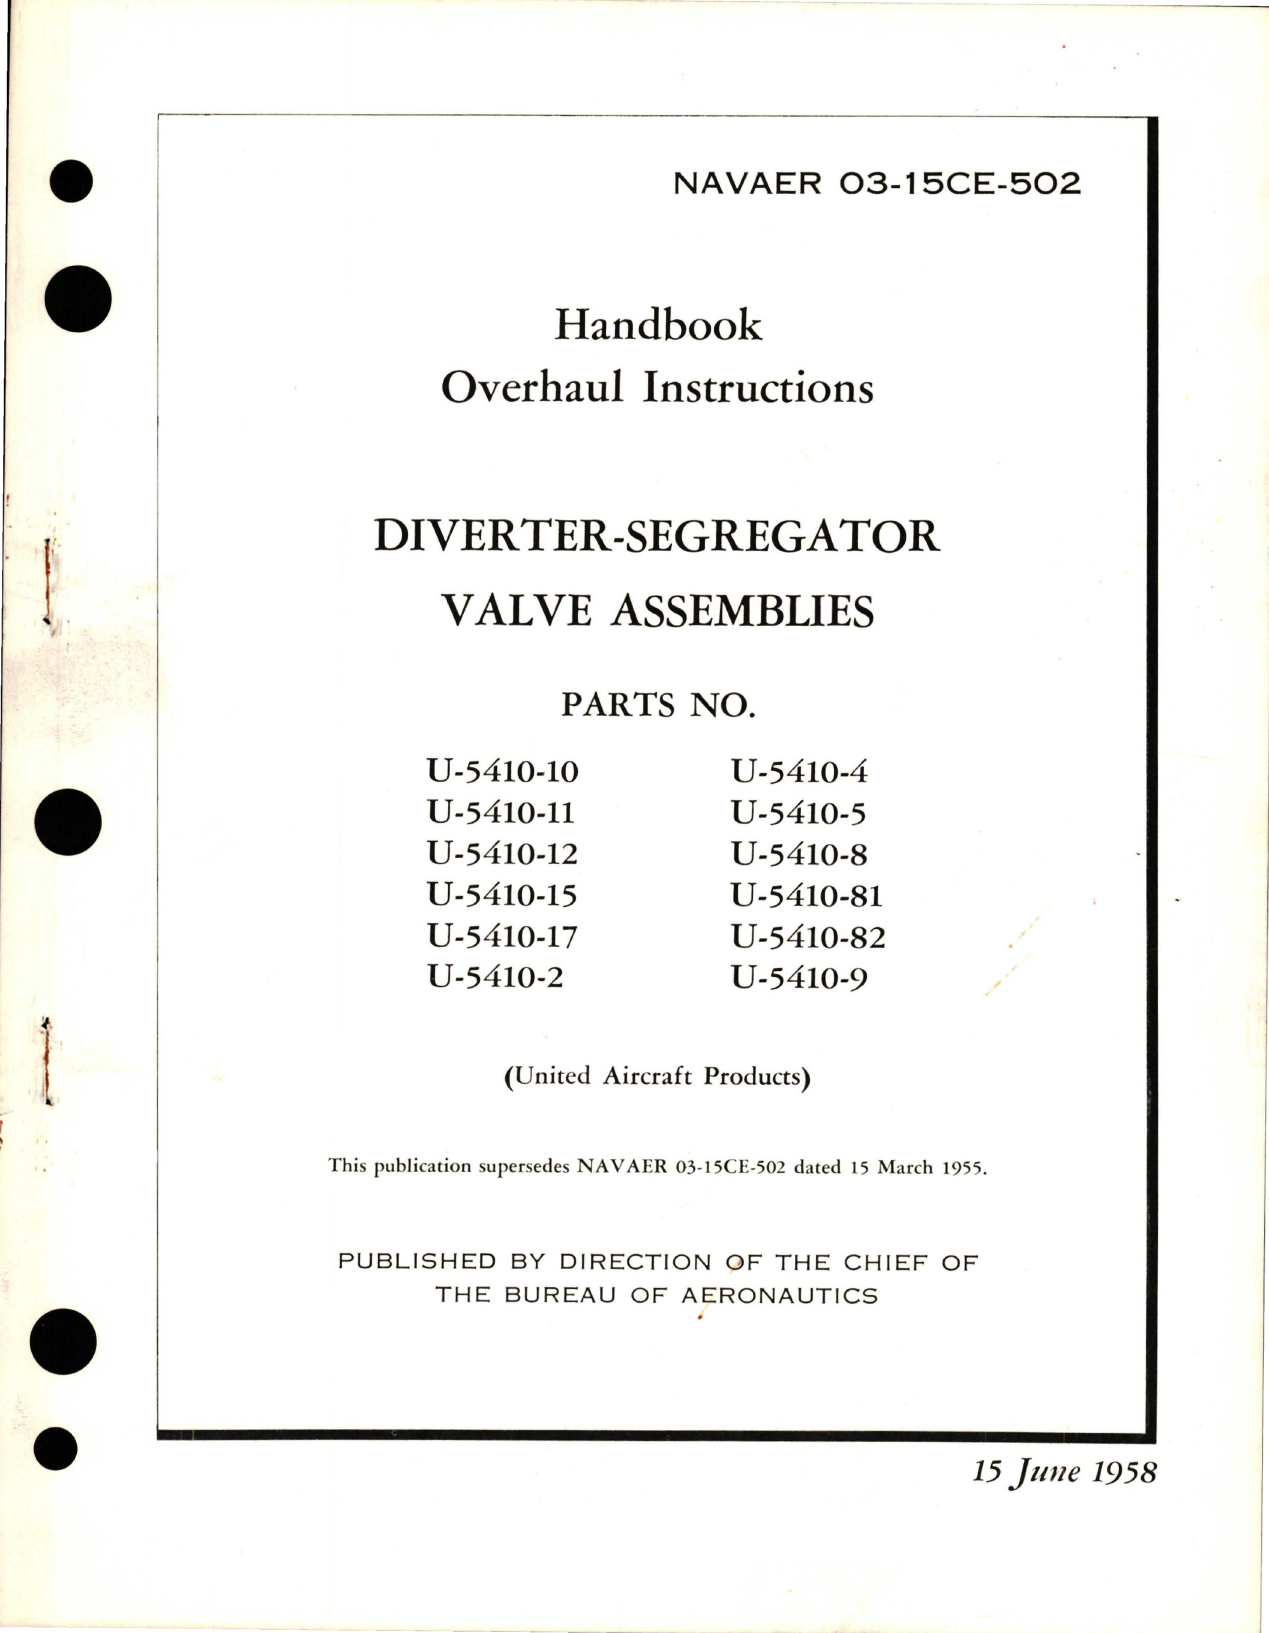 Sample page 1 from AirCorps Library document: Overhaul Instructions for Diverter-Segregator Valve Assemblies